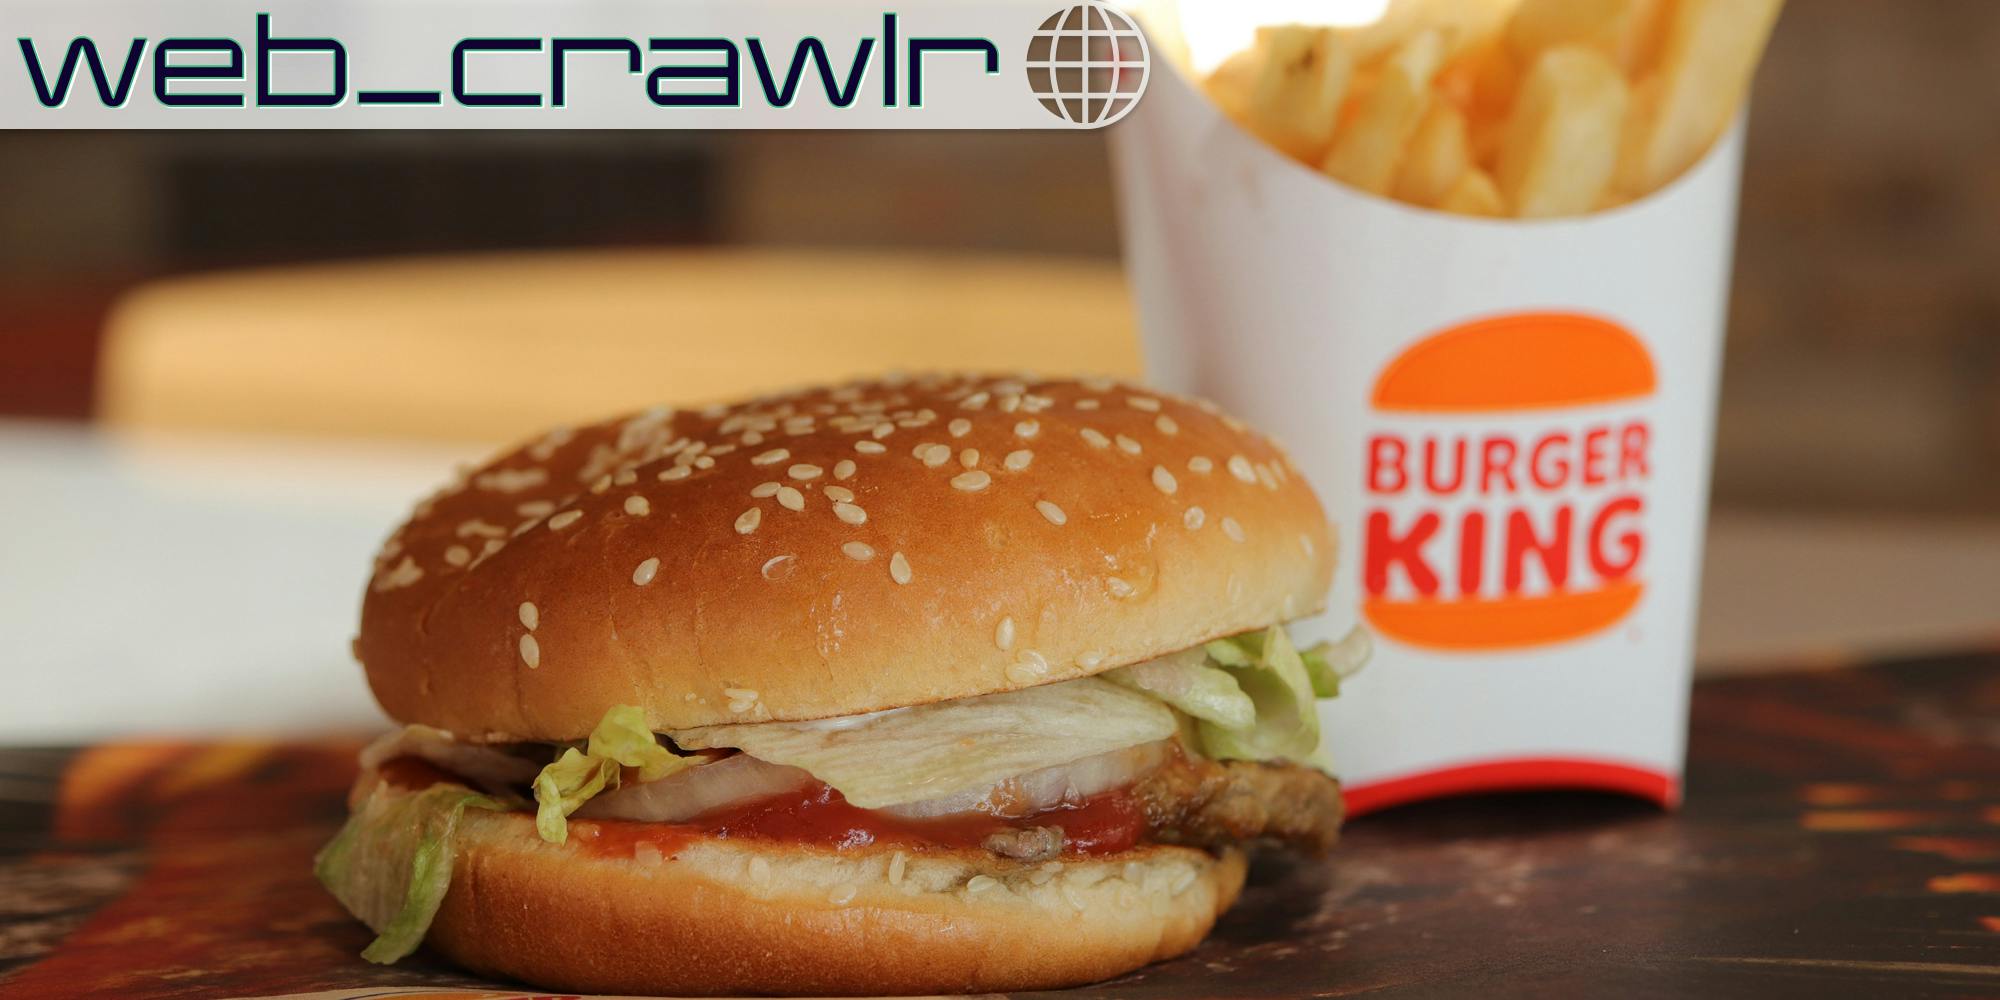 A Burger King burger and fries. The Daily Dot newsletter web_crawlr logo is in the top left corner.